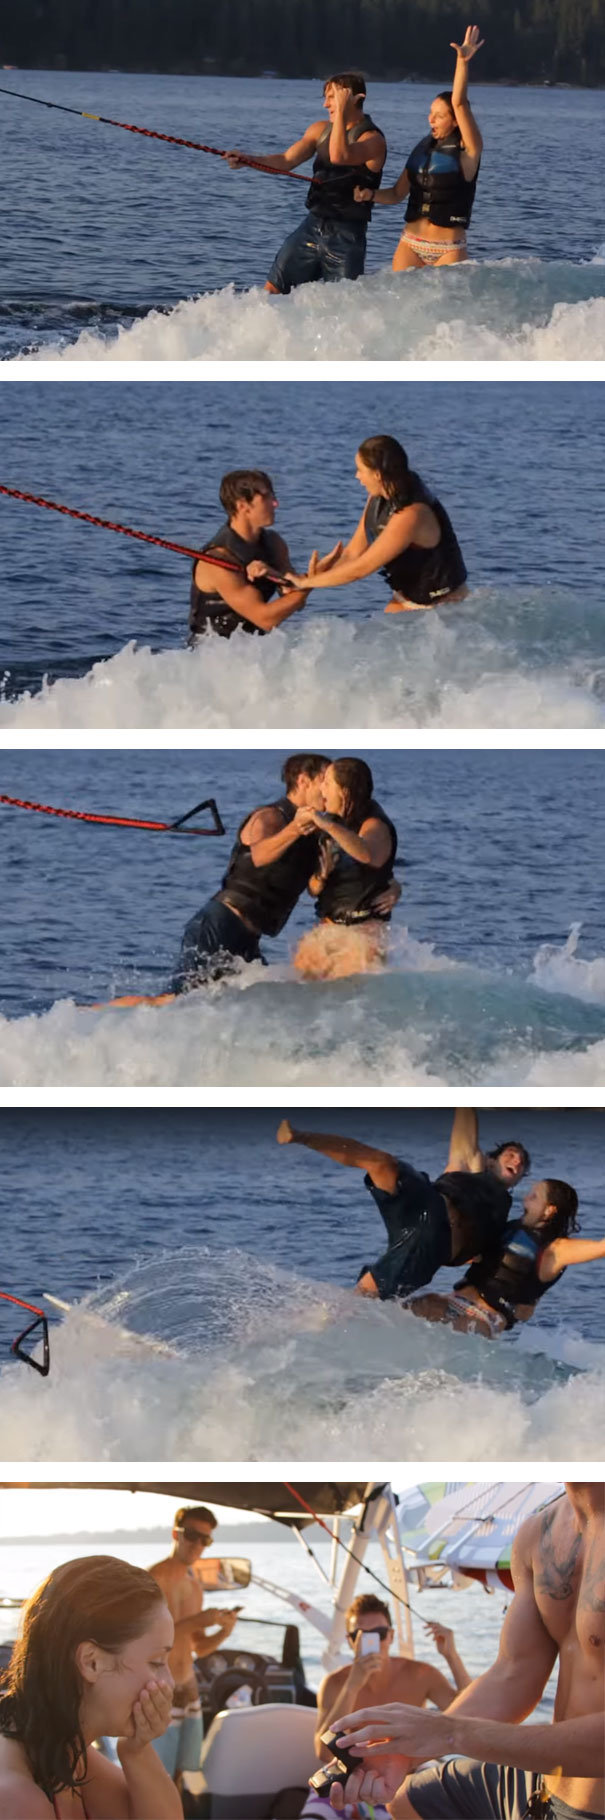 My Friend Proposed While Tandem Wakesurfing. She Totally Didn't Expect That